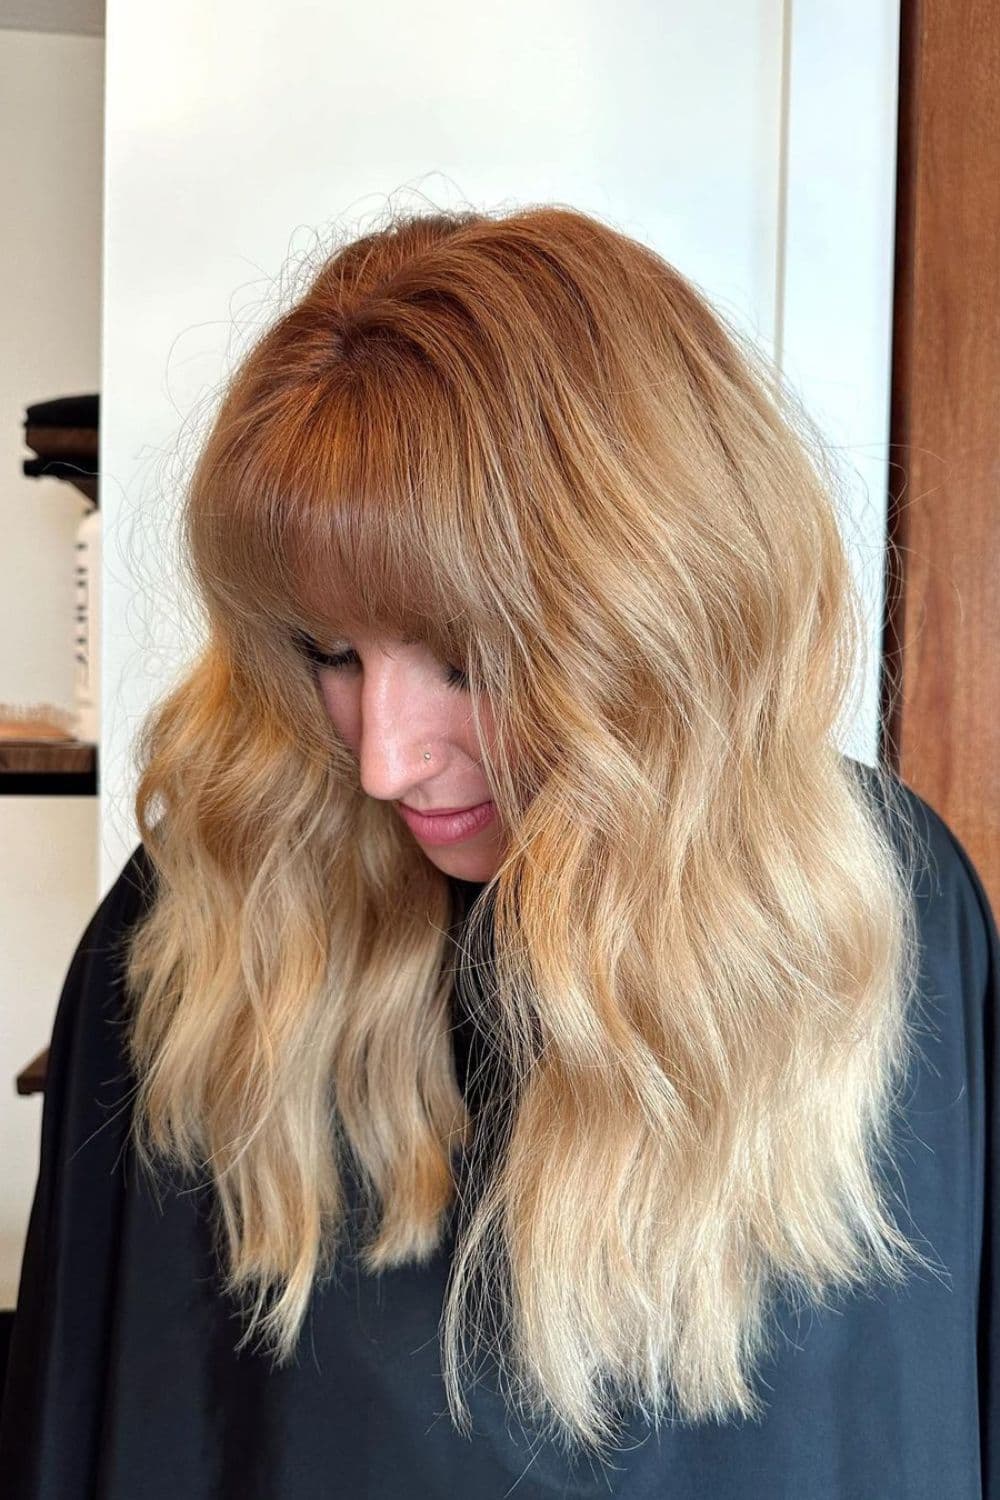 A woman with long strawberry blonde hair with classic bangs.